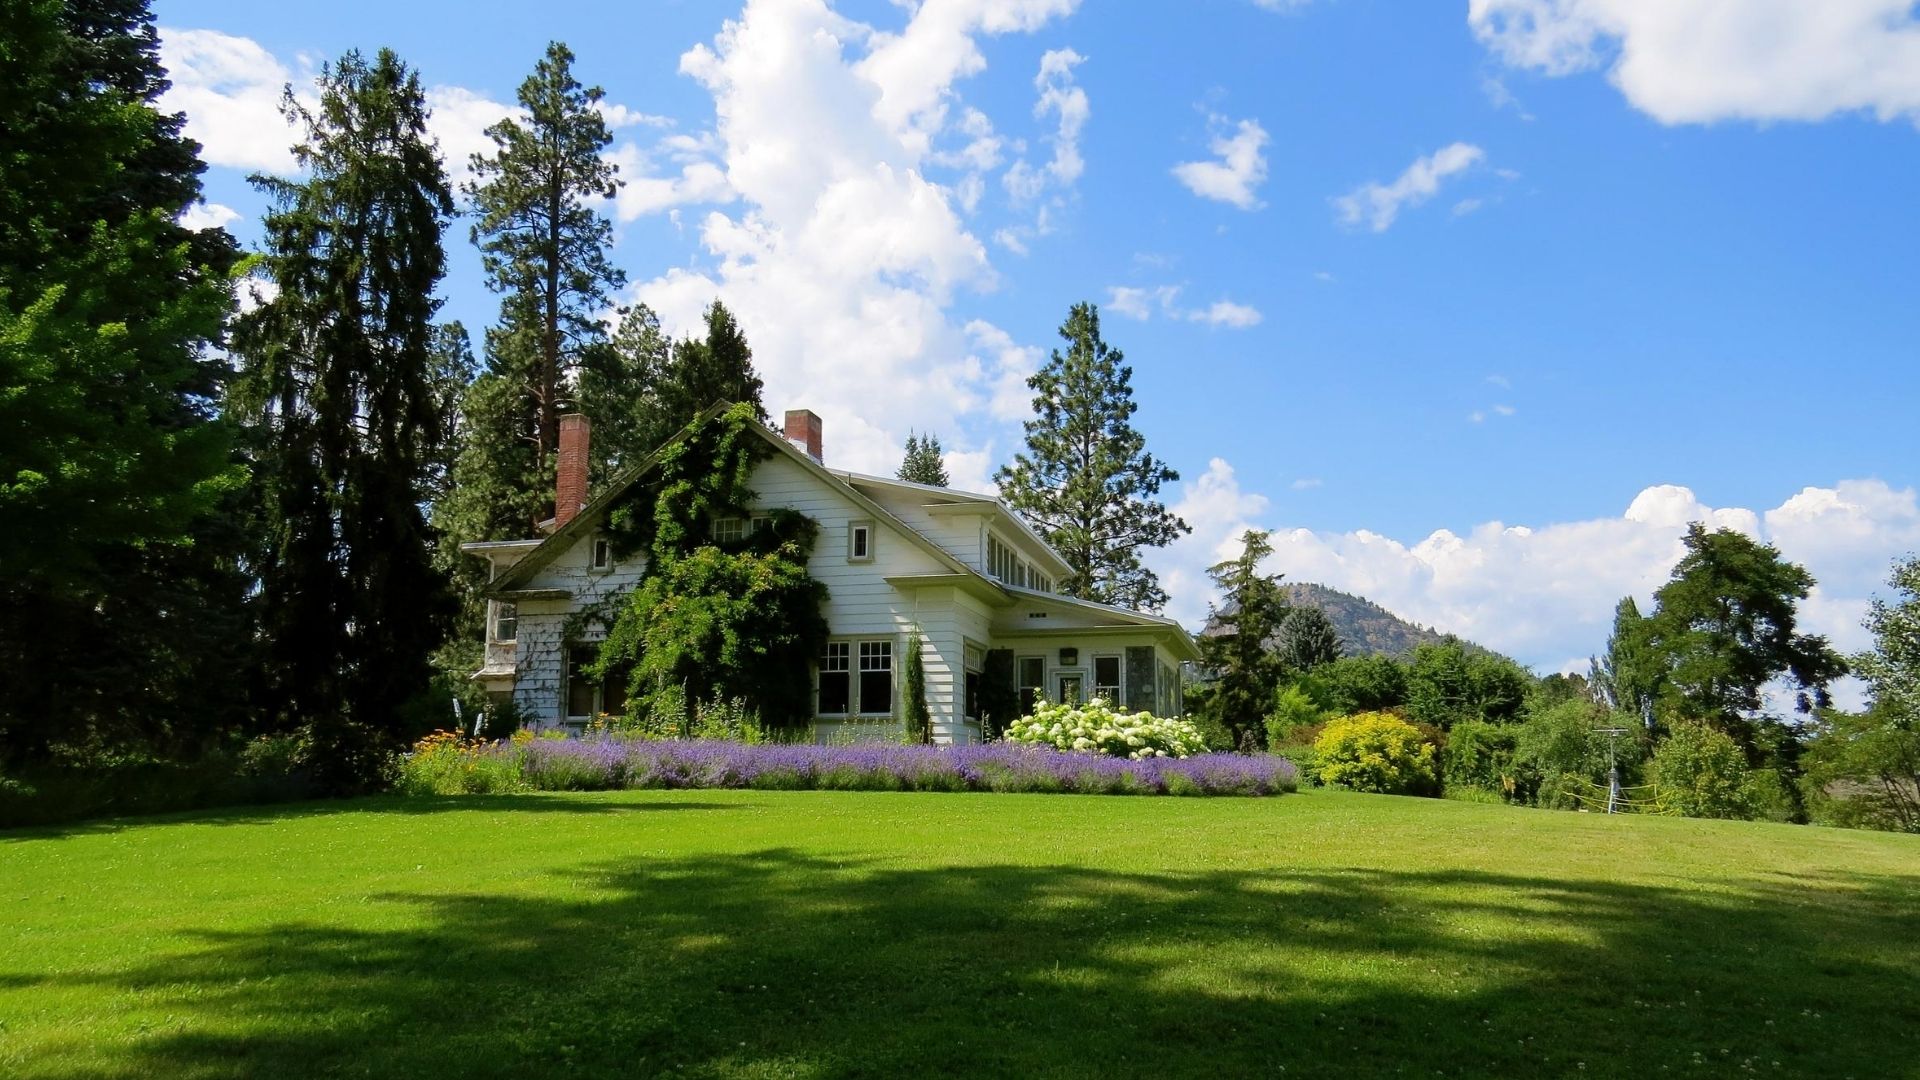 Home in summer with flowers and trees